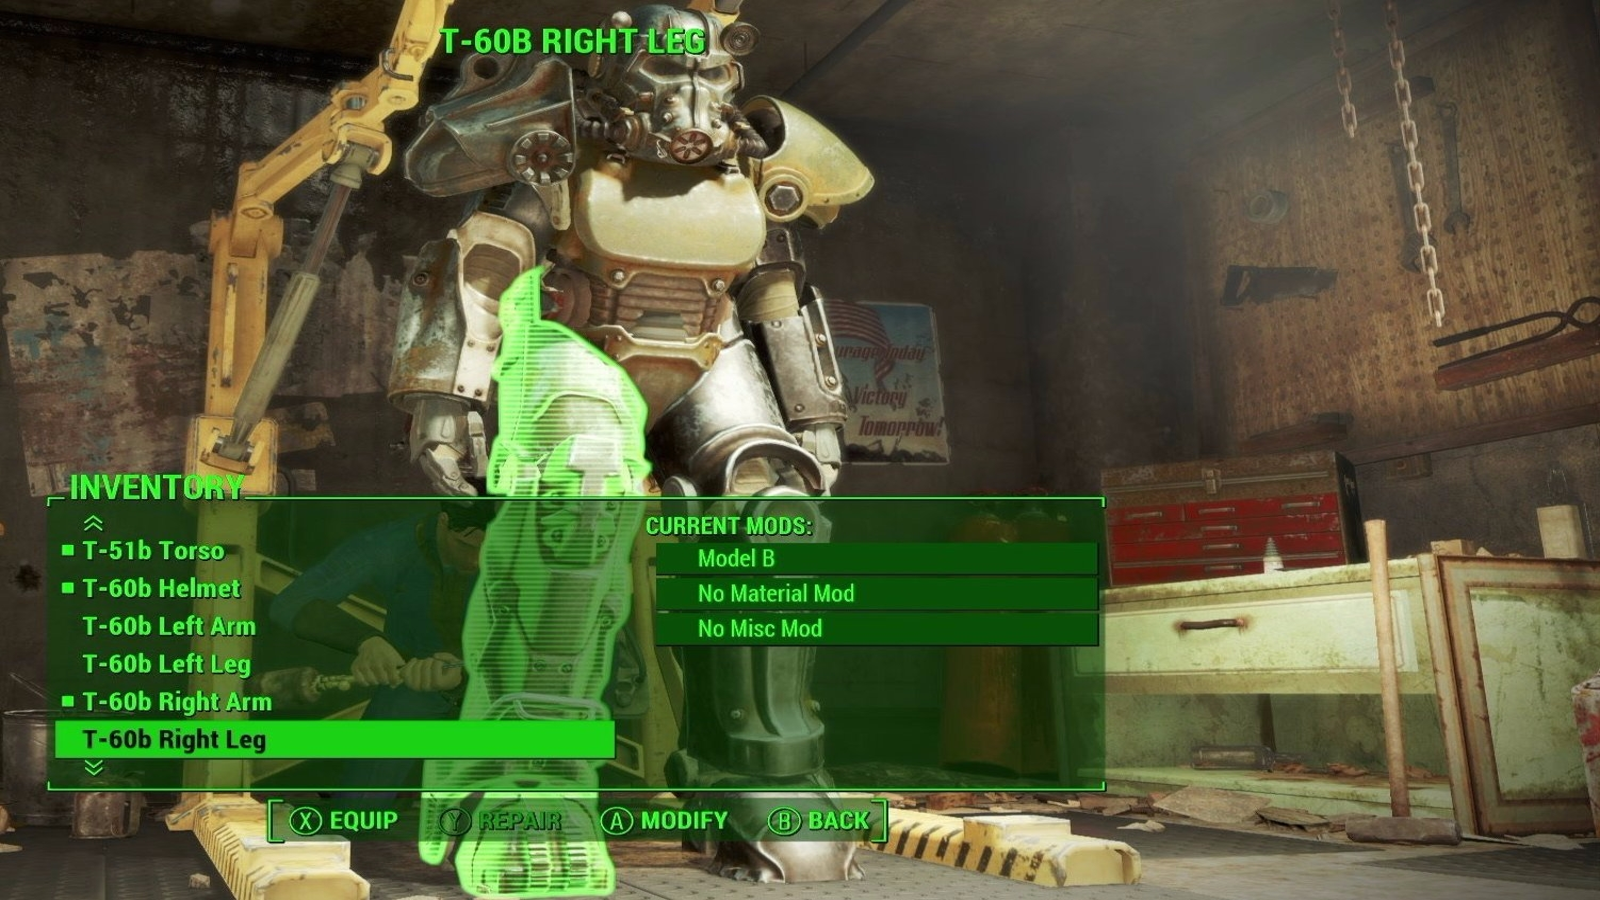 Fallout 4 is now the most modded Fallout game - overtaking New